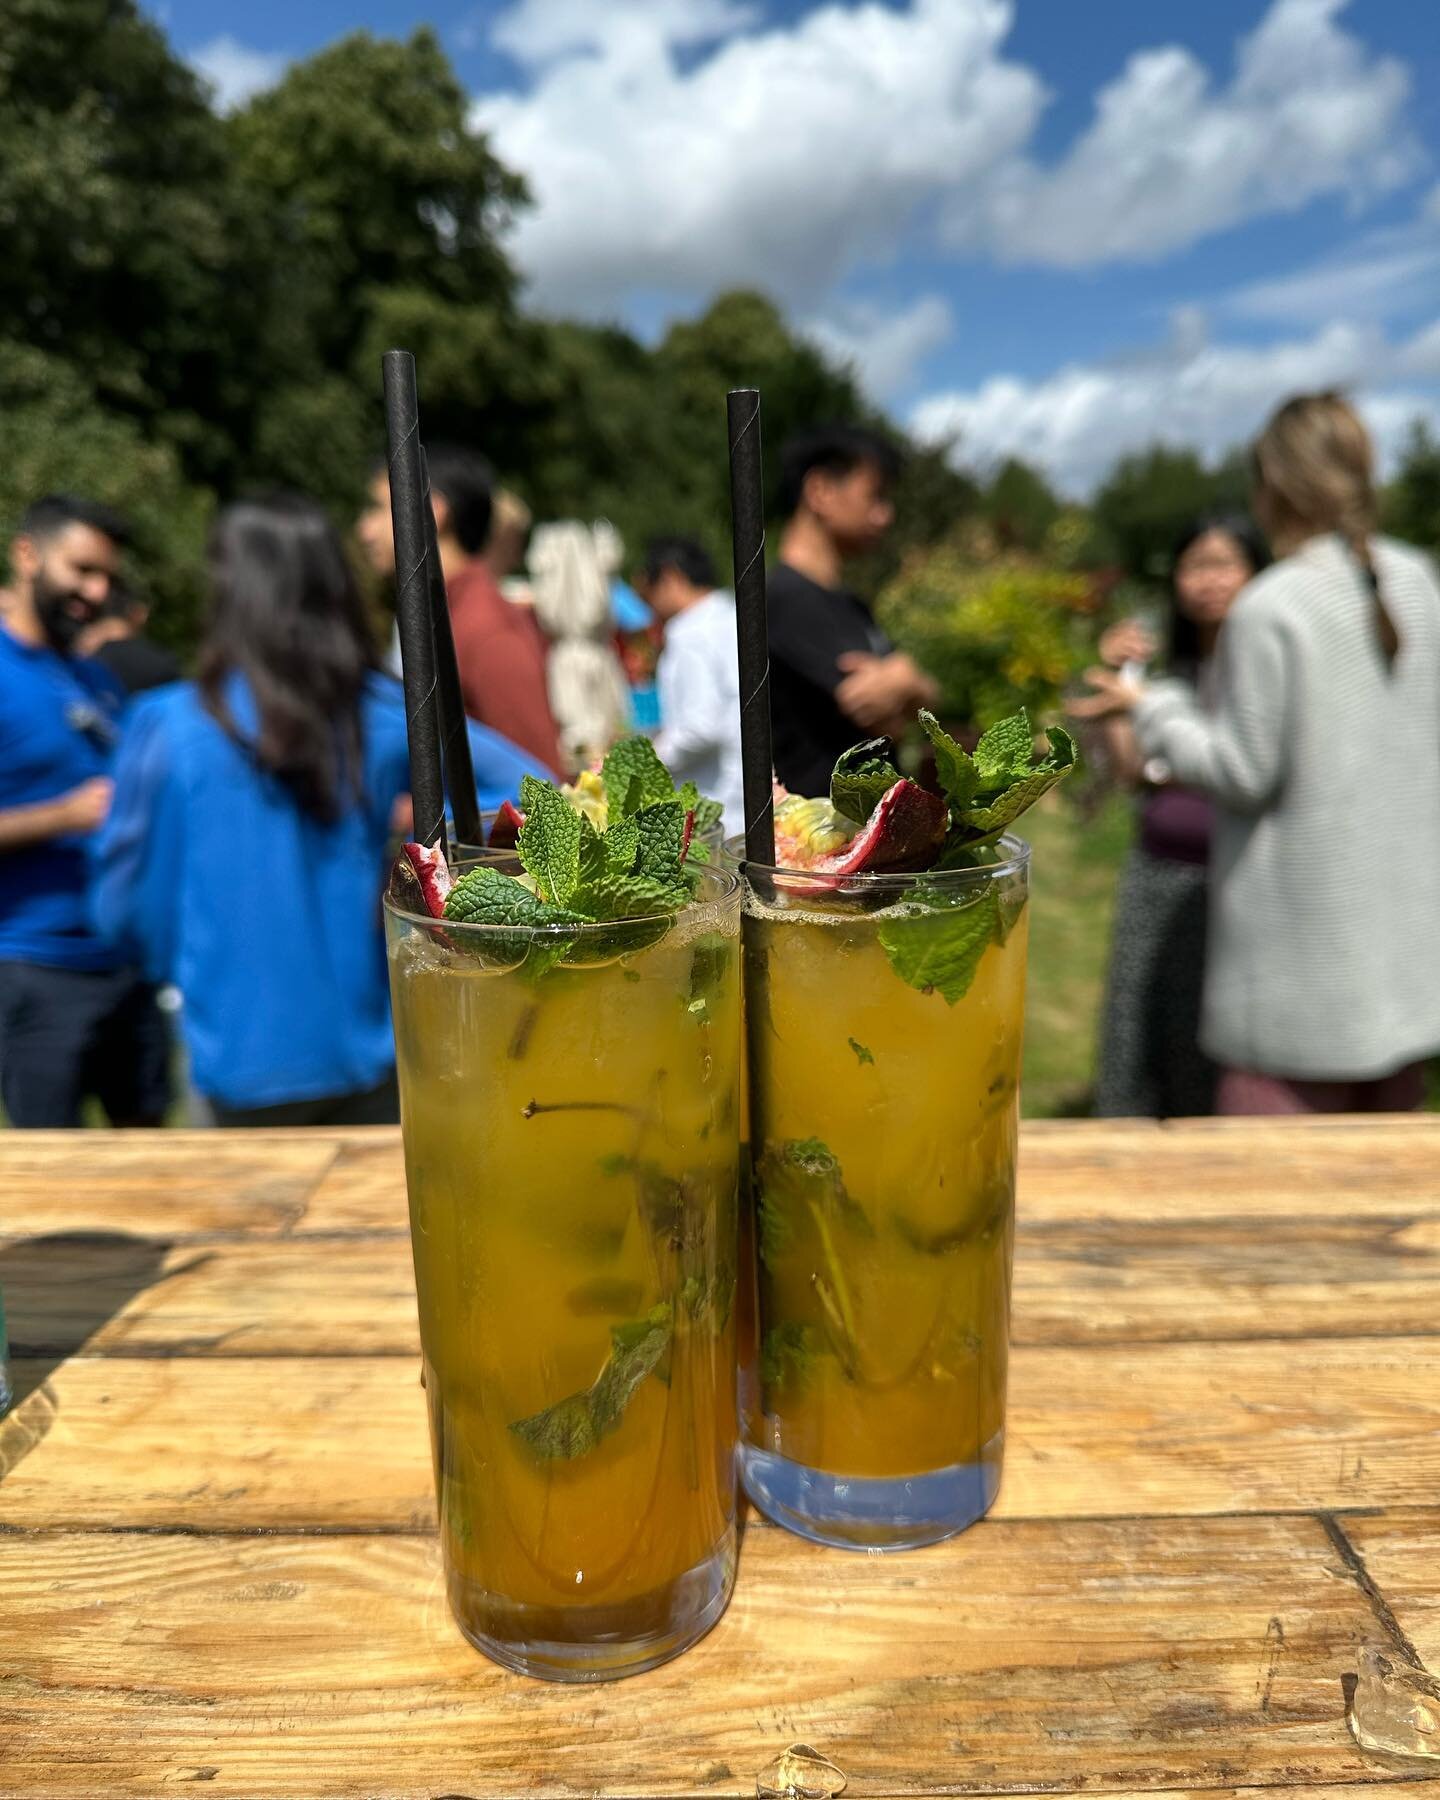 Fantastic event on a very sunny Saturday!

Nothing like a passion fruit mojito to get the party started&hellip;

#kentwedding #kent #kentweddings #kentmobilebar #mobilebartender #barhire #weddingbar #wedding  #henparty #cocktailsofinstagram #mixology